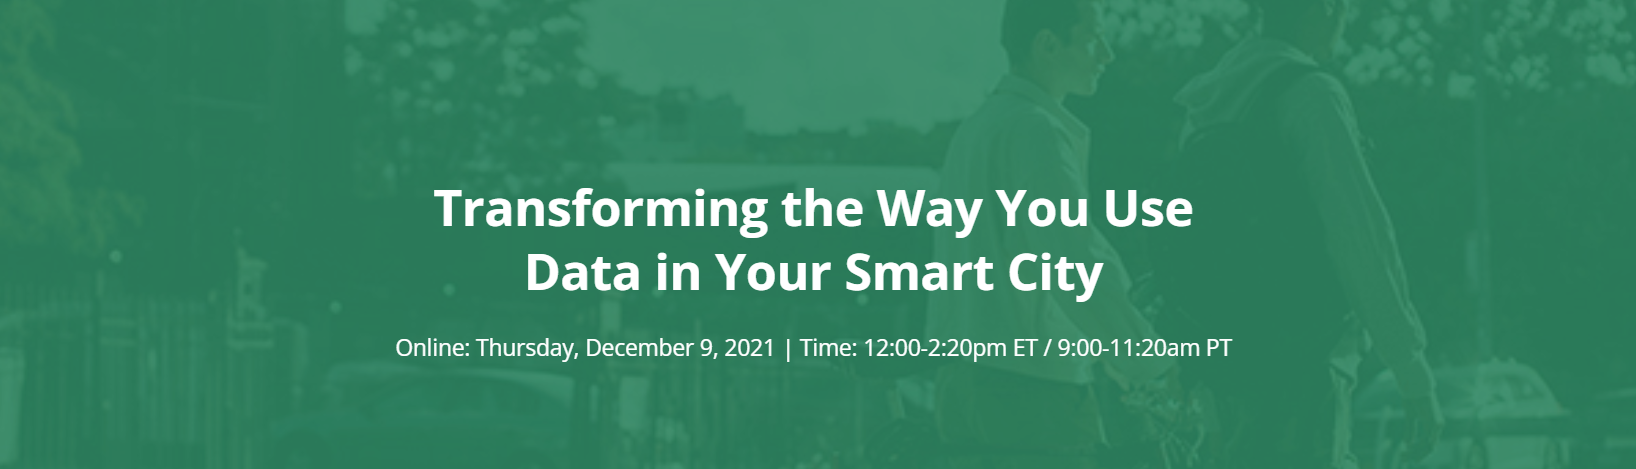 Transforming the Way You Use Data in Your Smart City